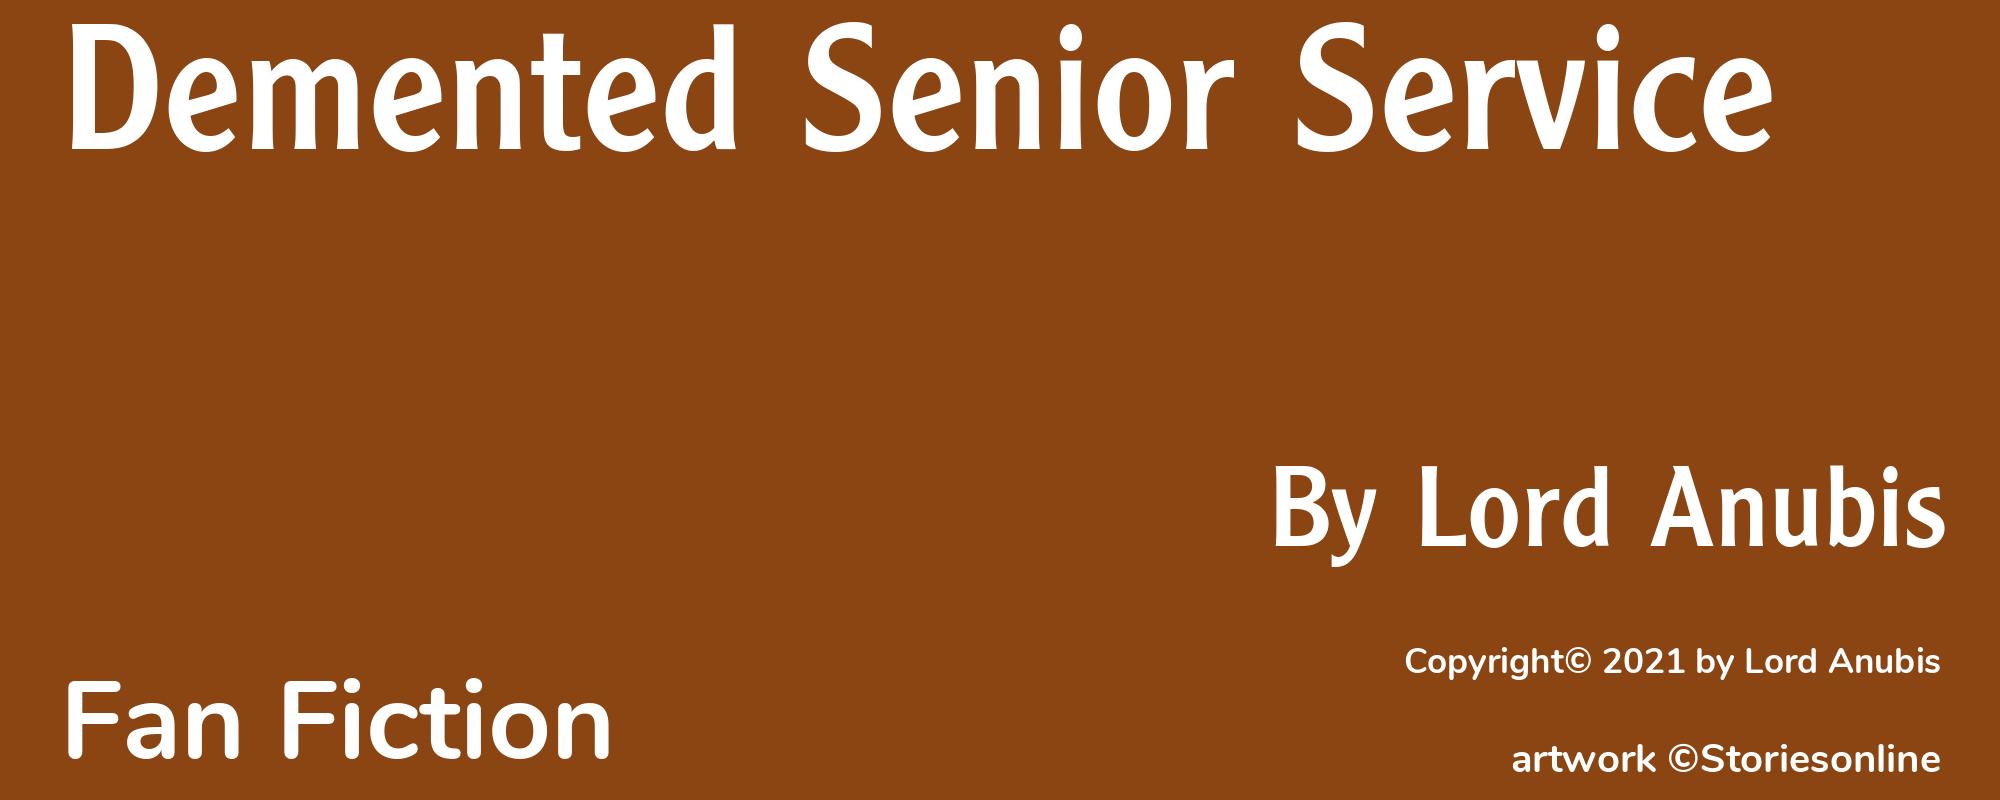 Demented Senior Service - Cover